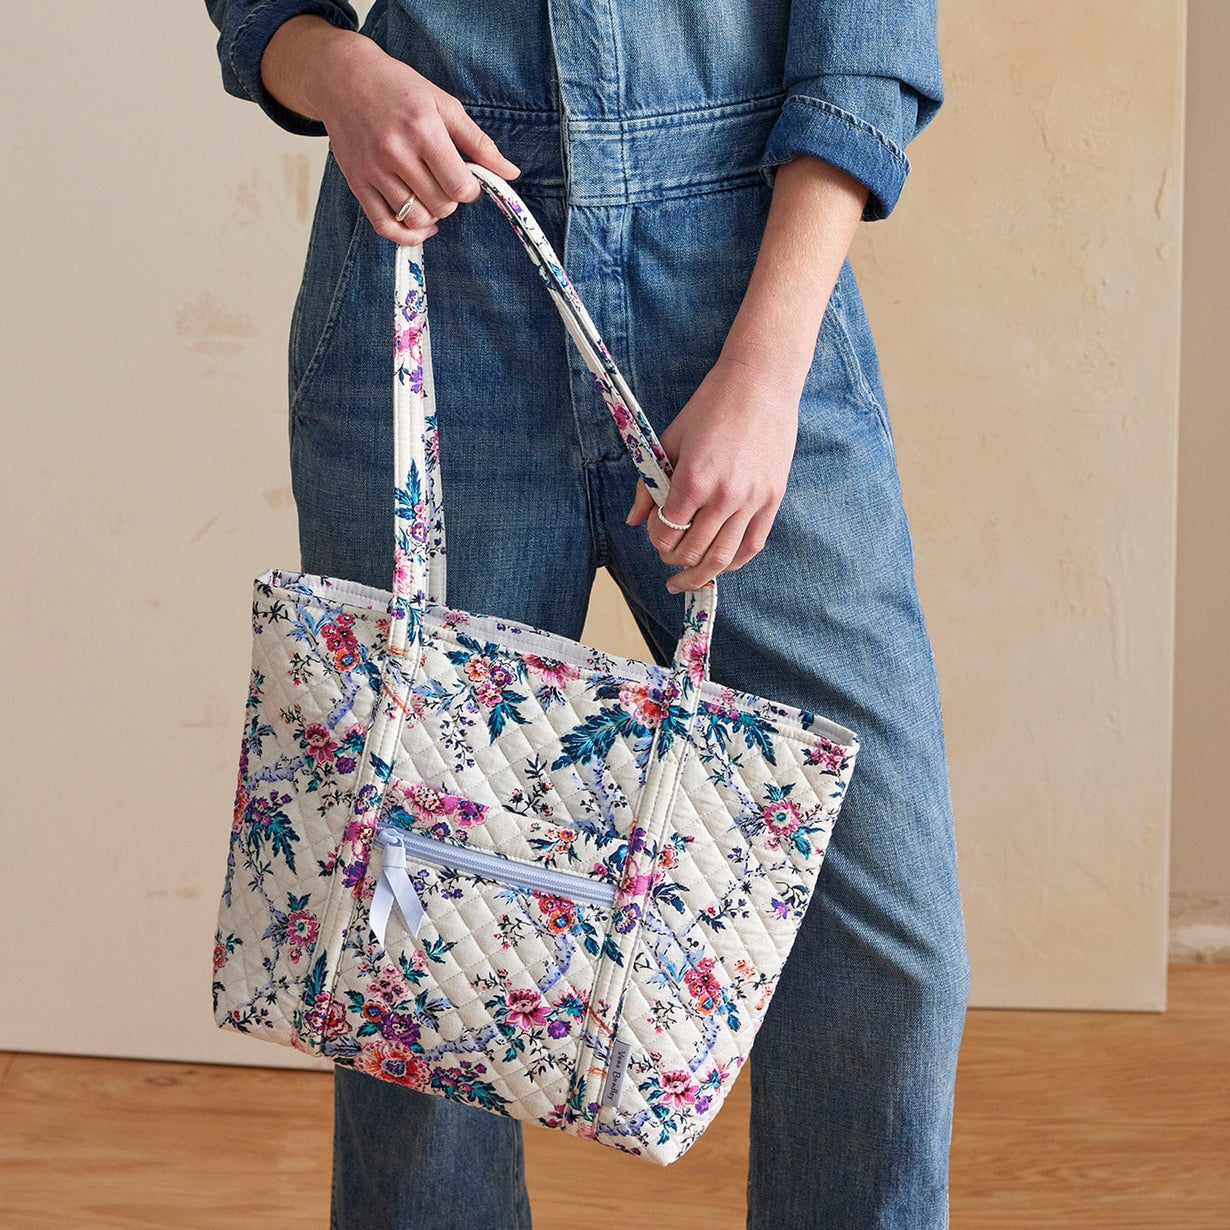 model holding small quilted tote bag with floral pattern